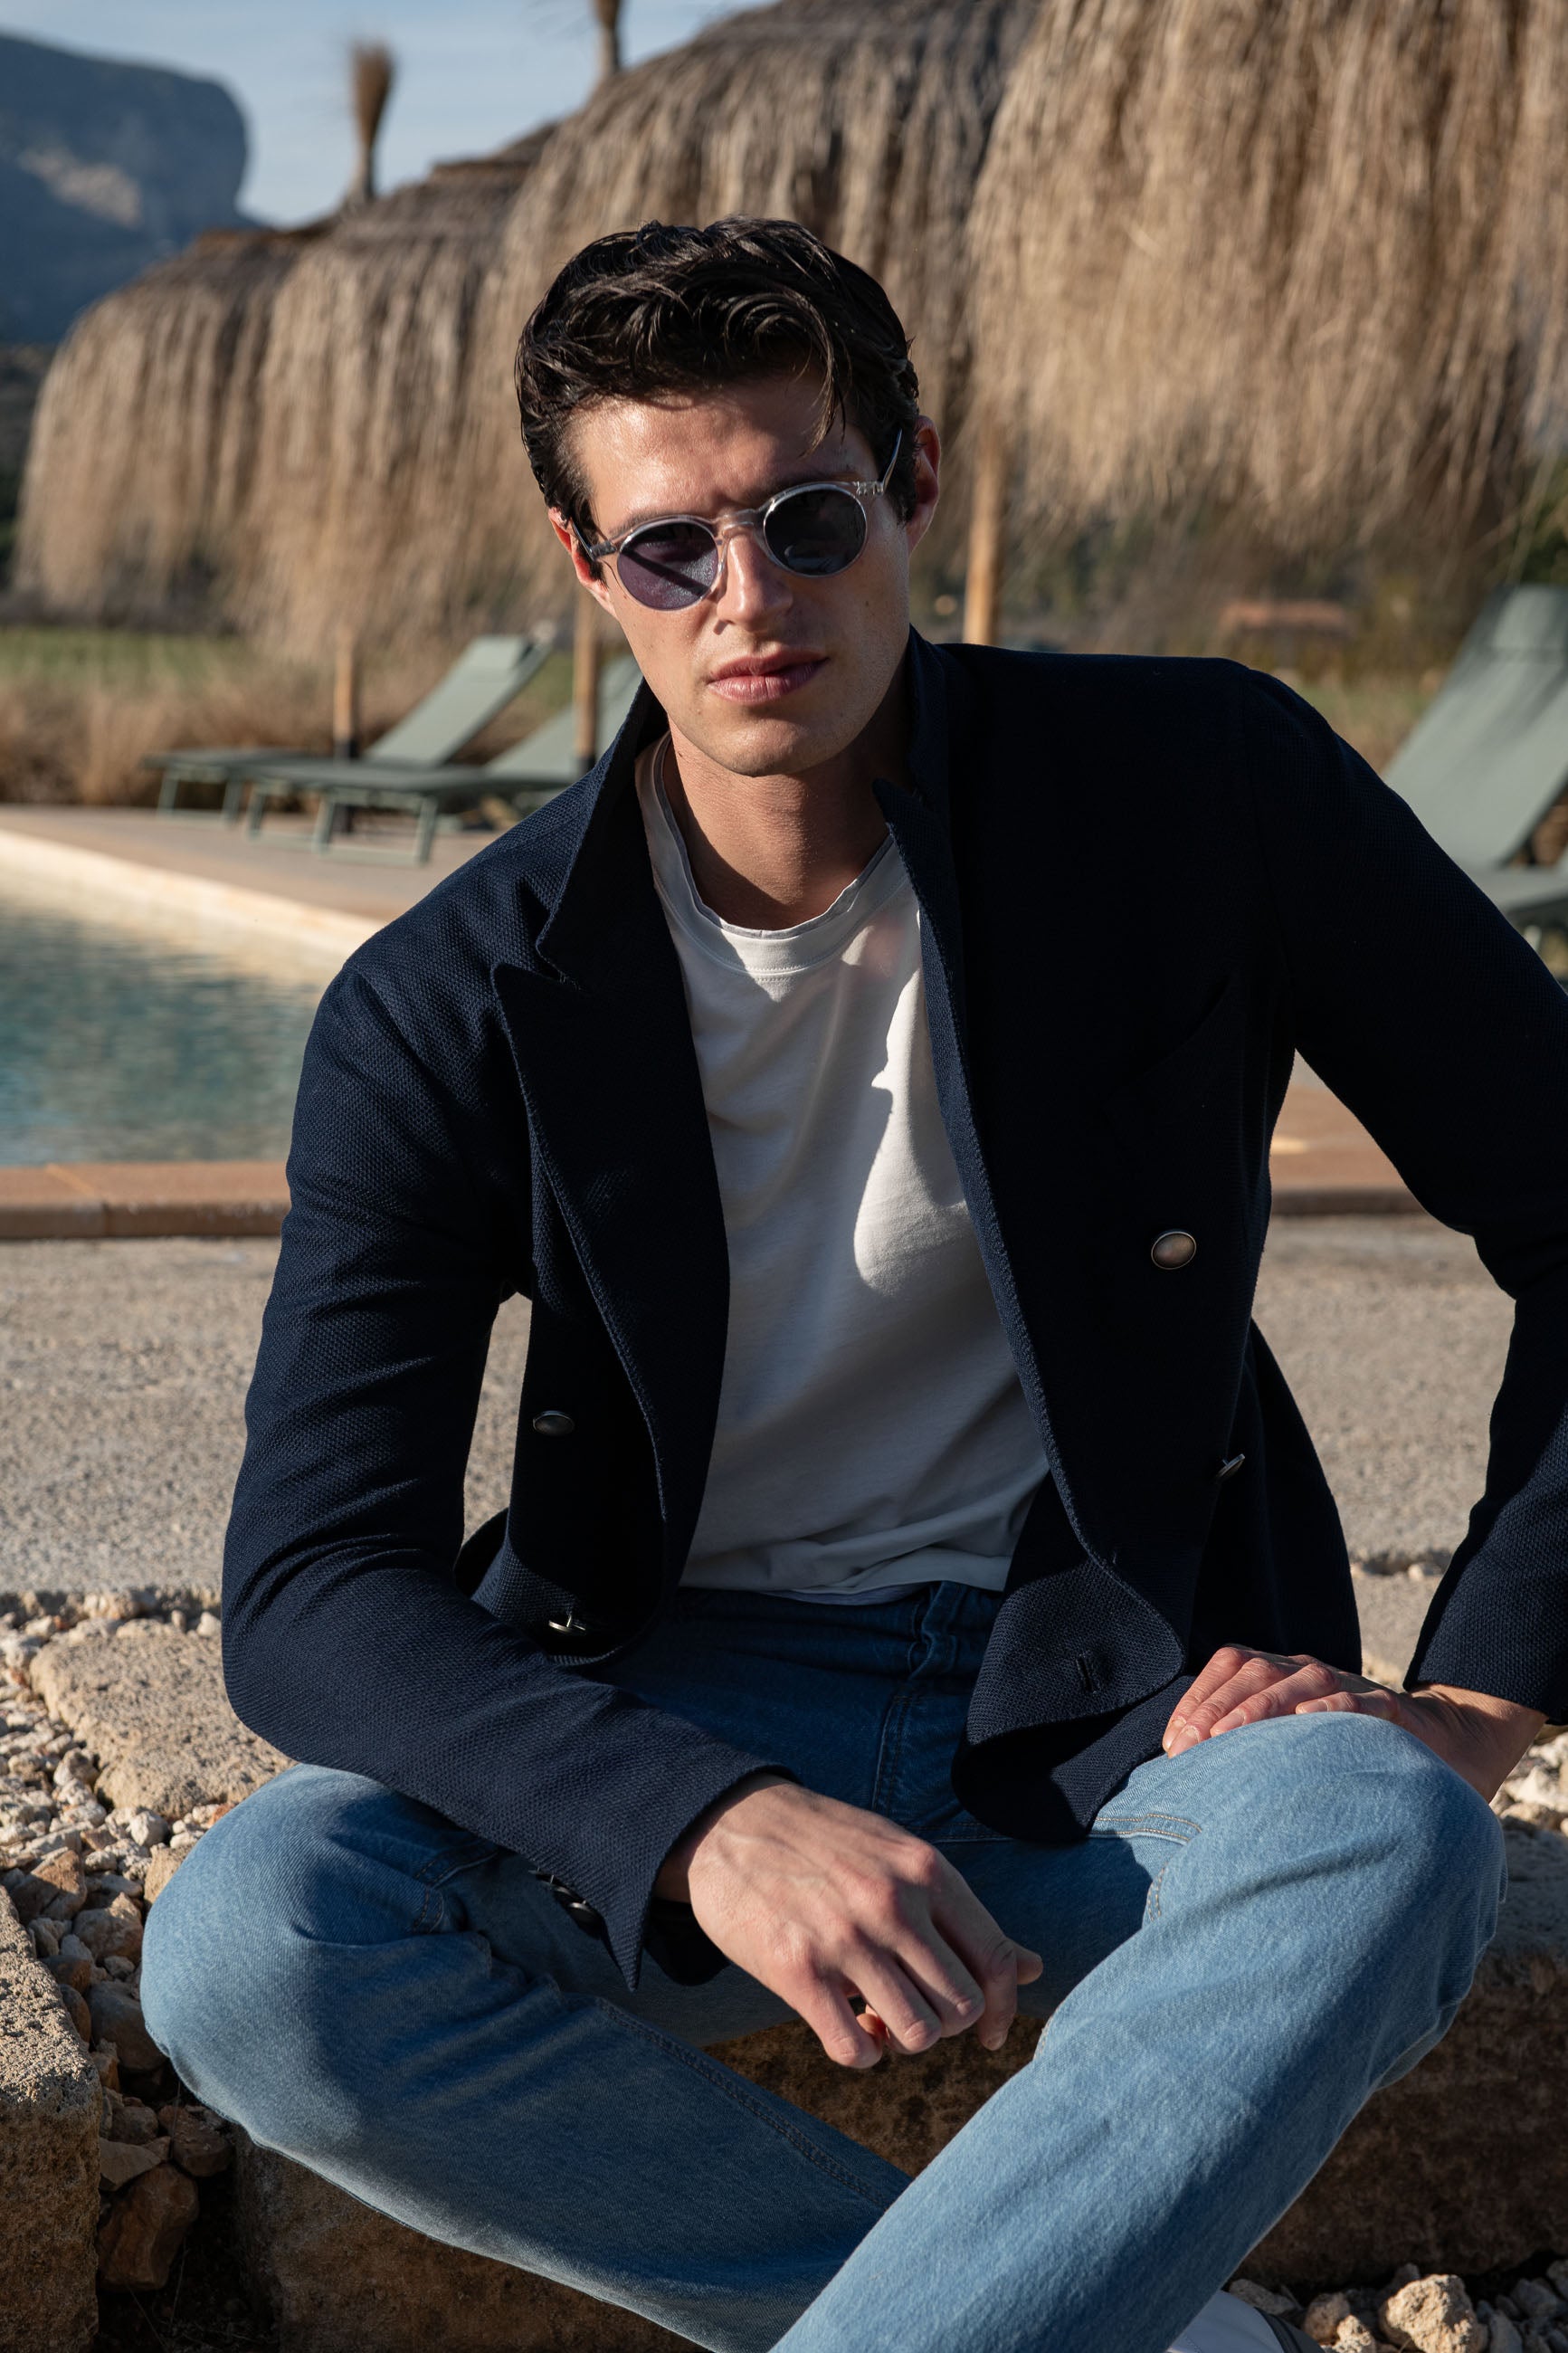 Navy Jersey Jacket, Double Breasted Jersey Jacket, Blue Navy Jersey Jacket, Veste en jersey bleu marine, Veste en jersey à double boutonnage, Veste en jersey bleu marine, Giacca in jersey navy, giacca in jersey doppiopetto, giacca in jersey blu navy, 